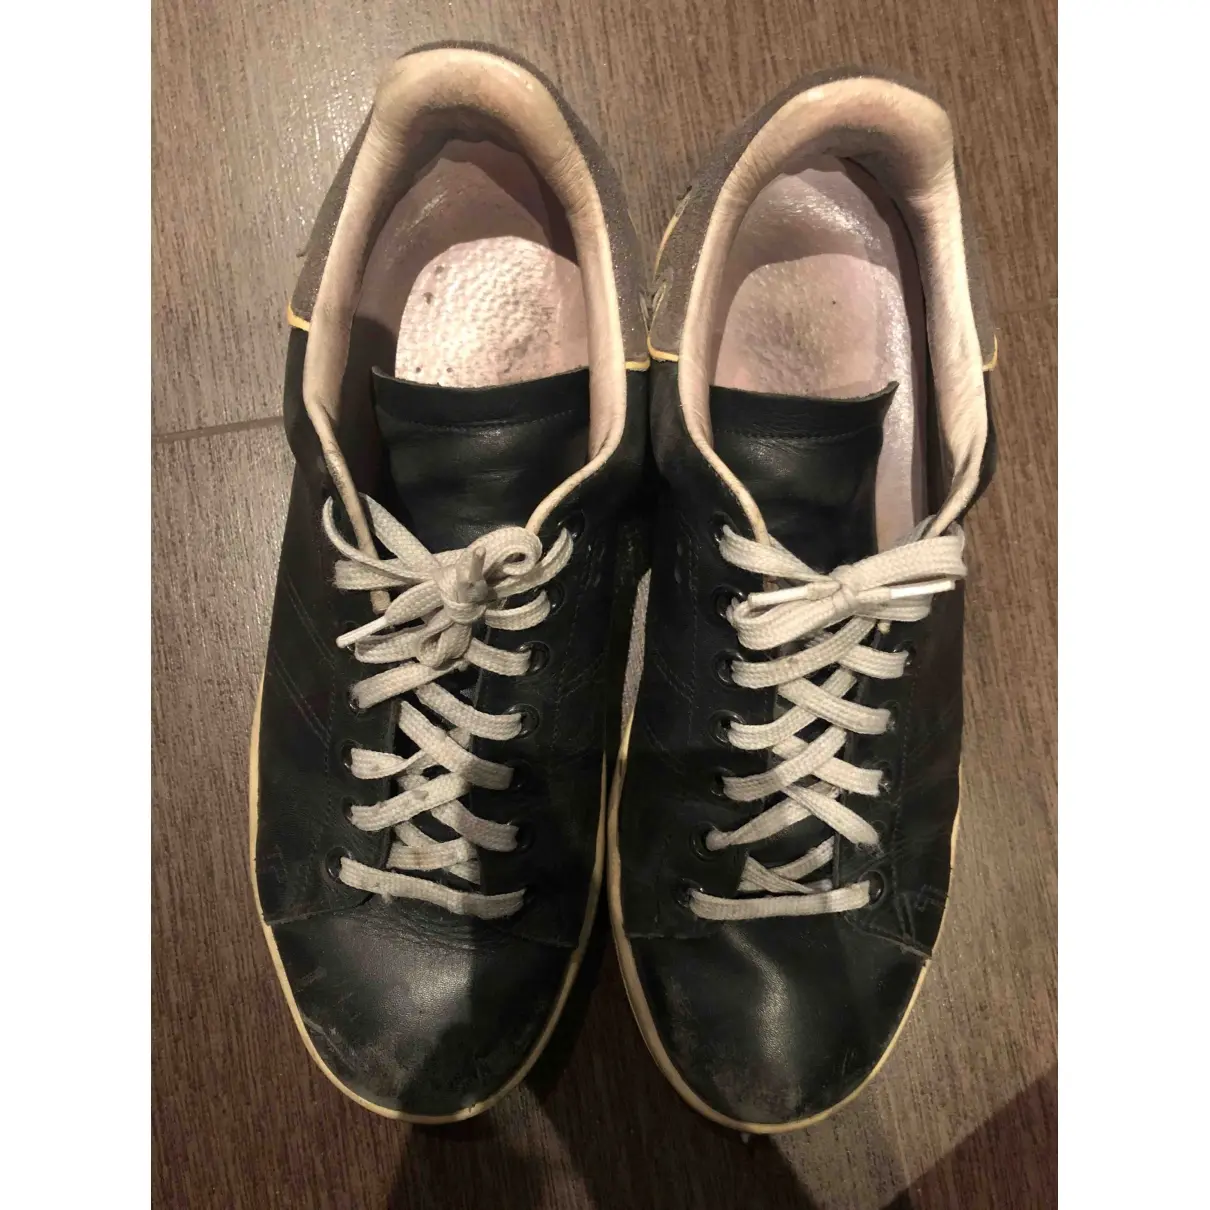 Isabel Marant Bart leather trainers for sale